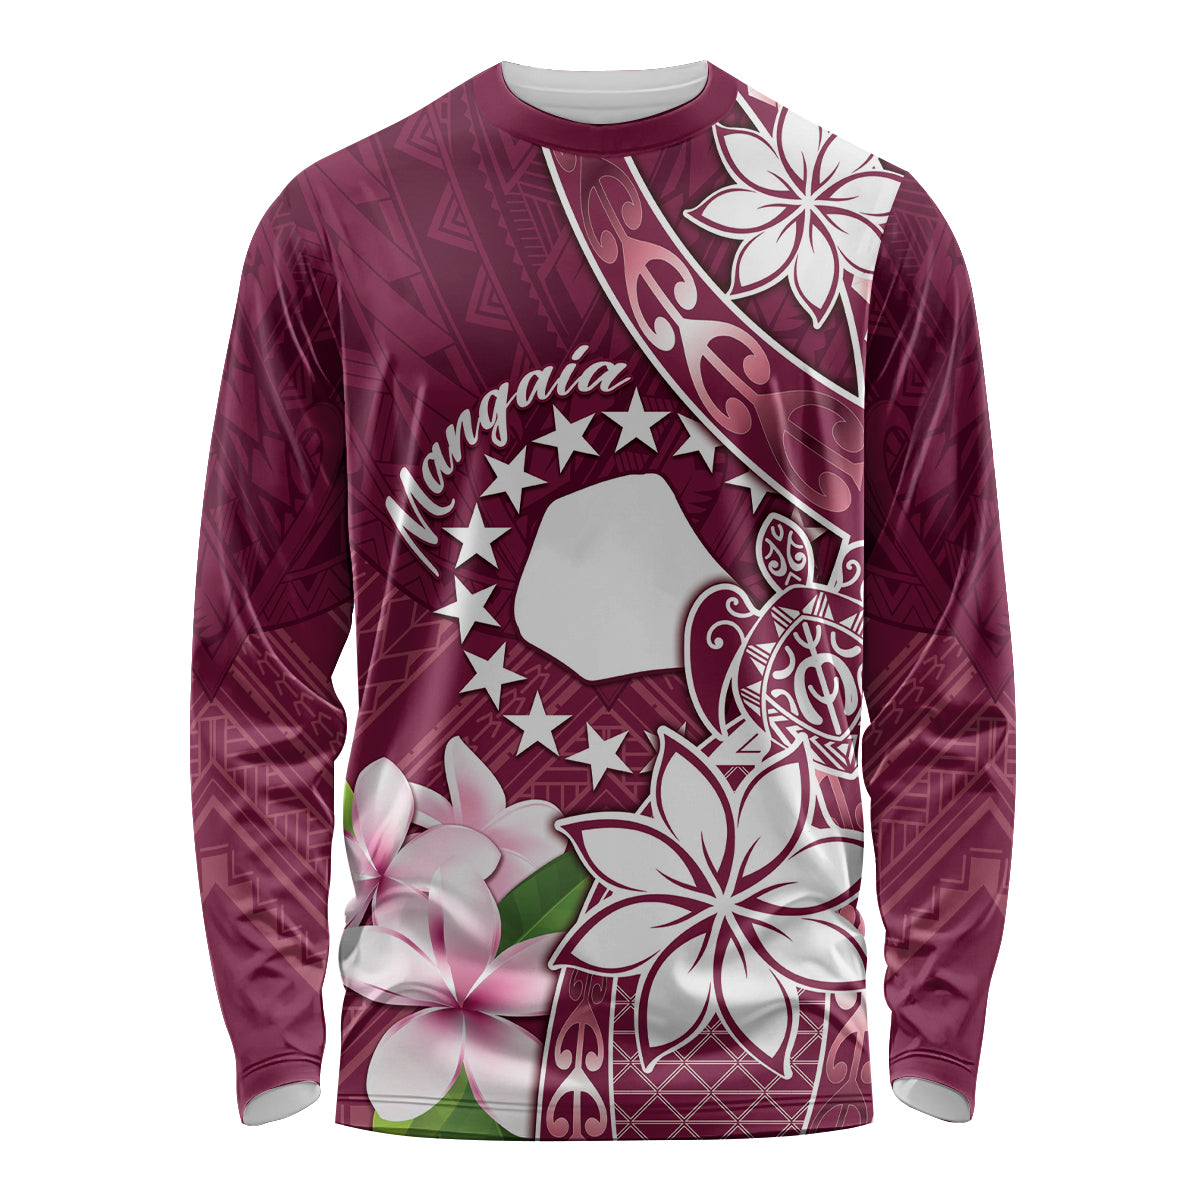 Personalised Cook Island Mangaia Gospel Day Long Sleeve Shirt Floral Tribal Pattern